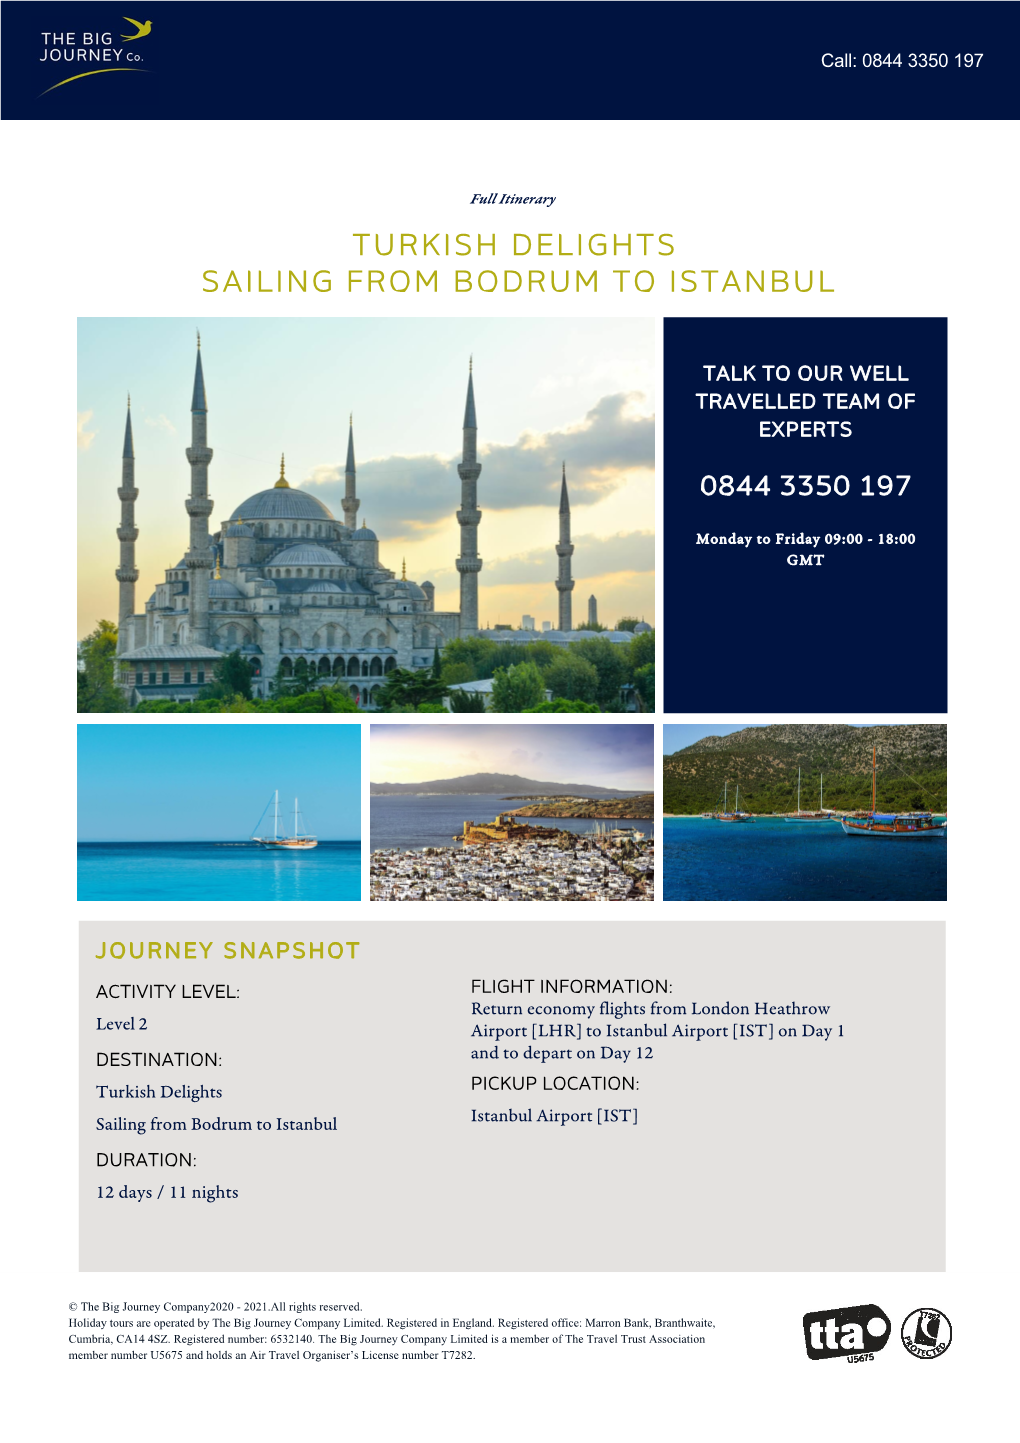 Turkish Delights from Istanbul to Dalaman